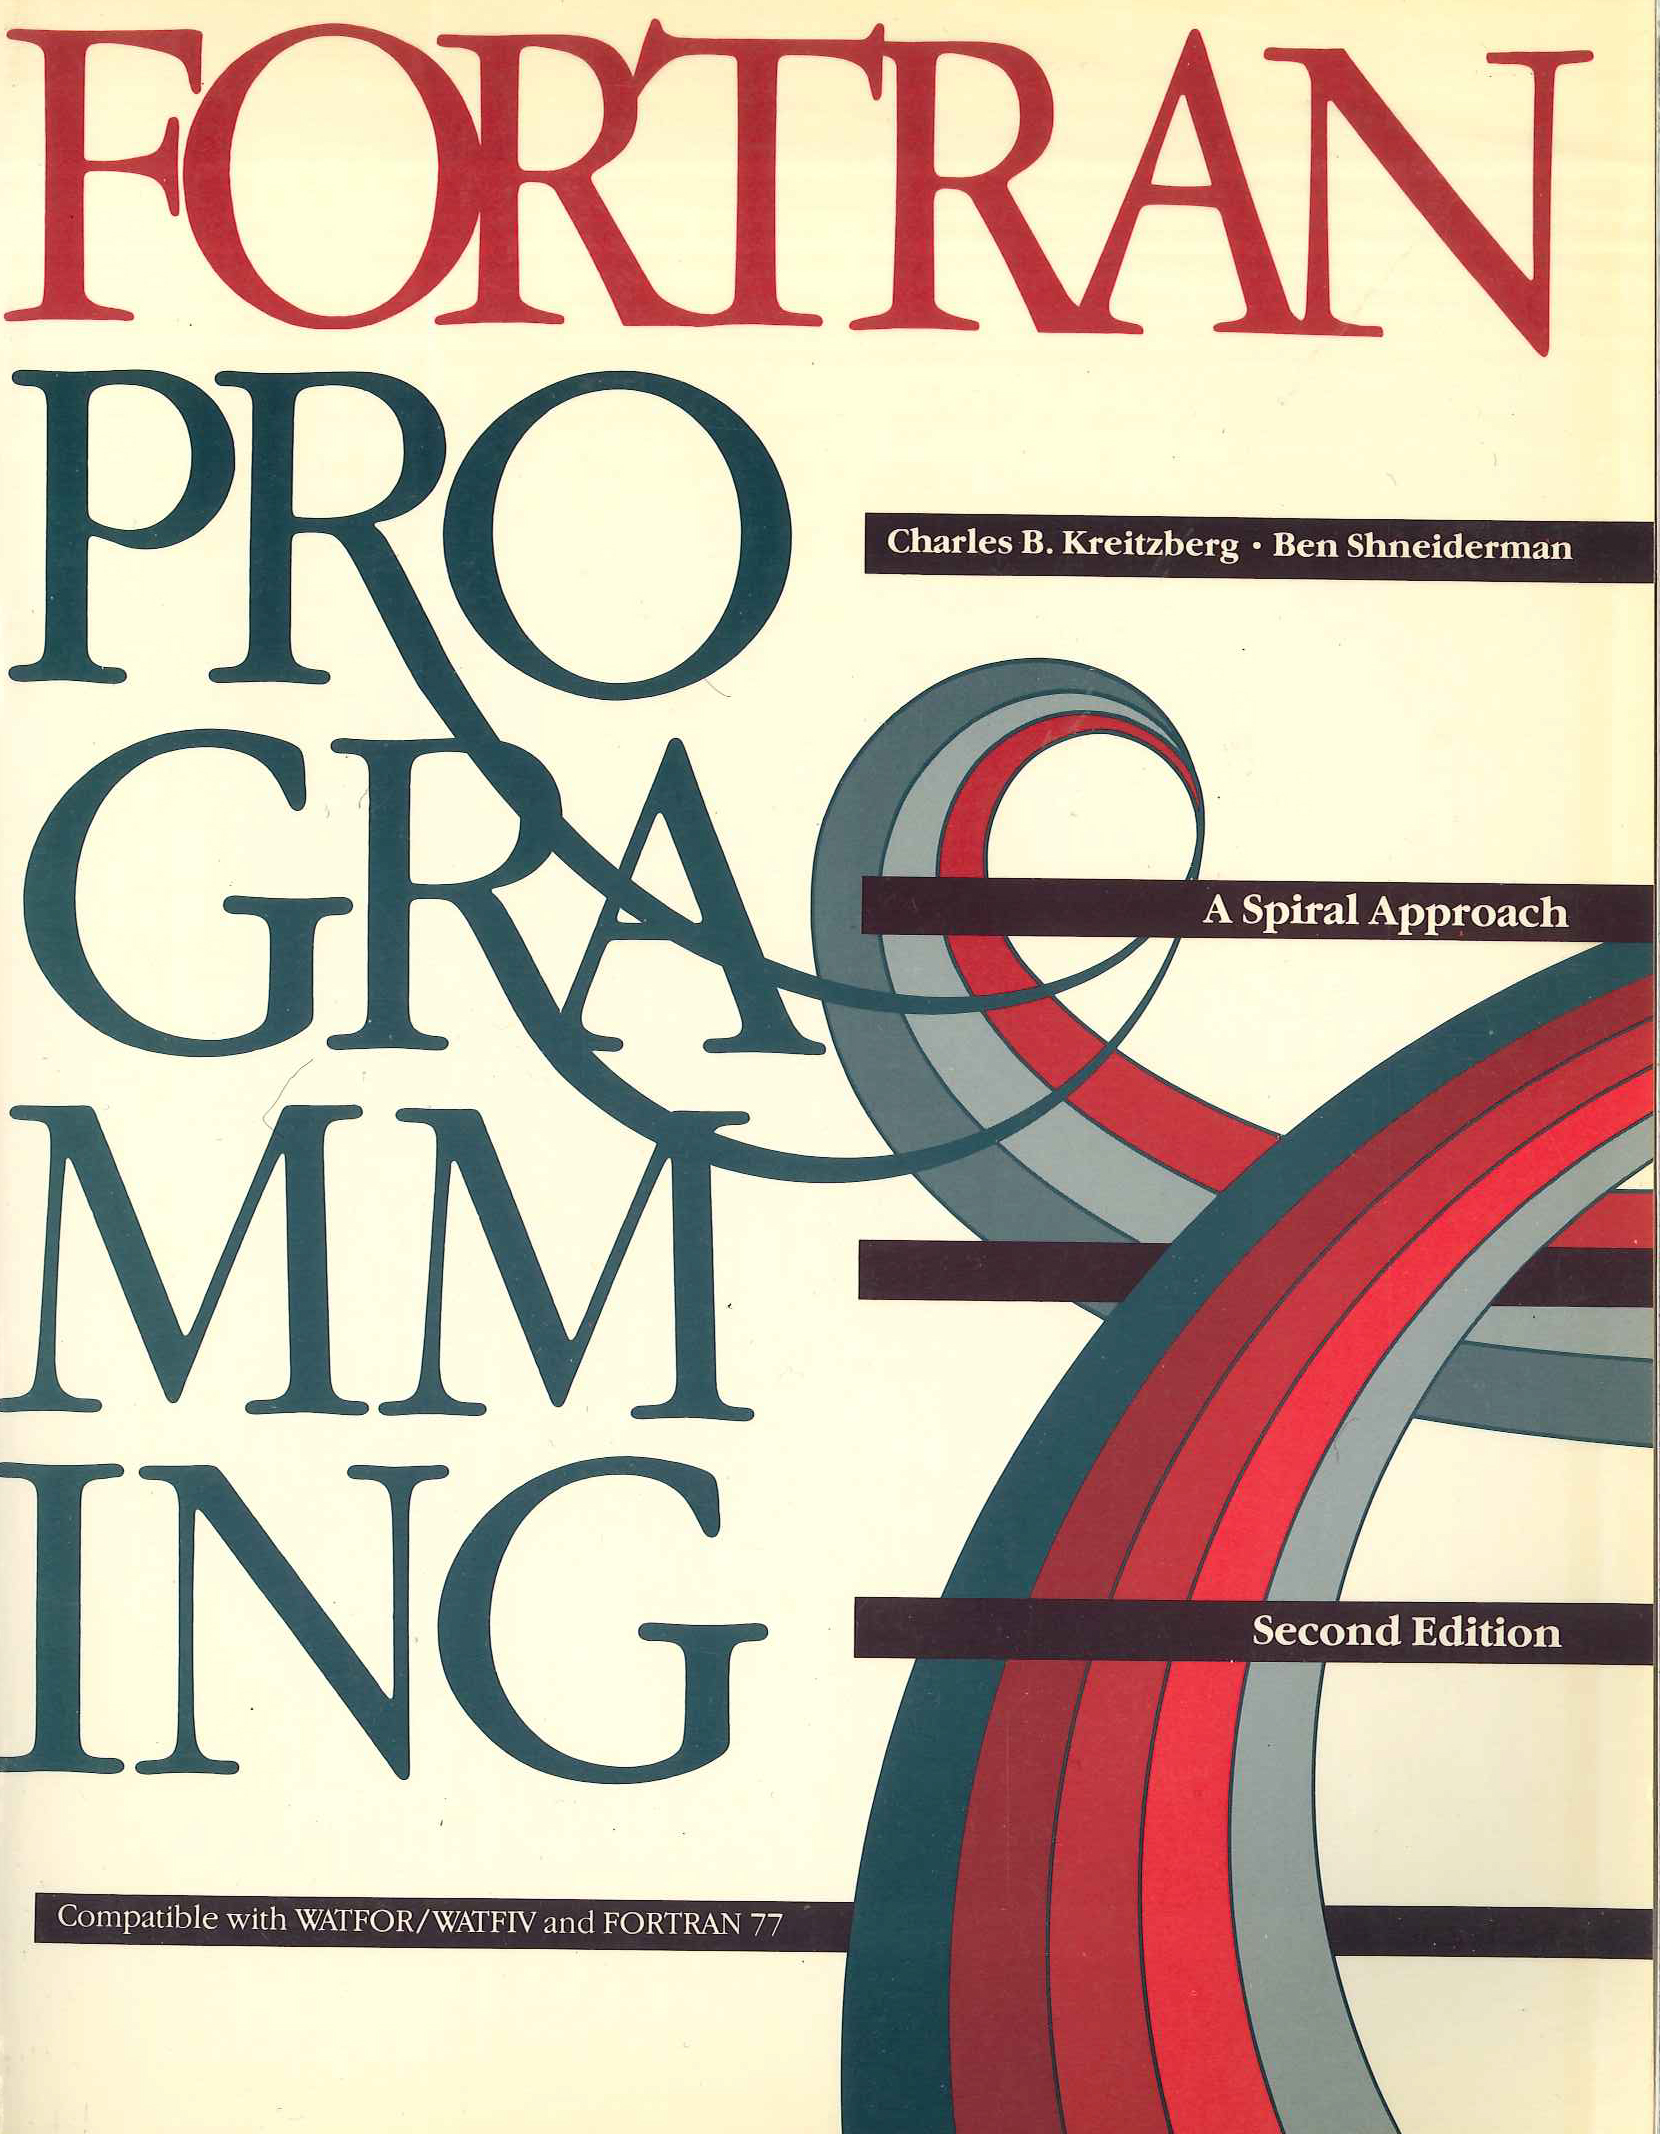 Fortran Programming: A Spiral Approach: Second Edition